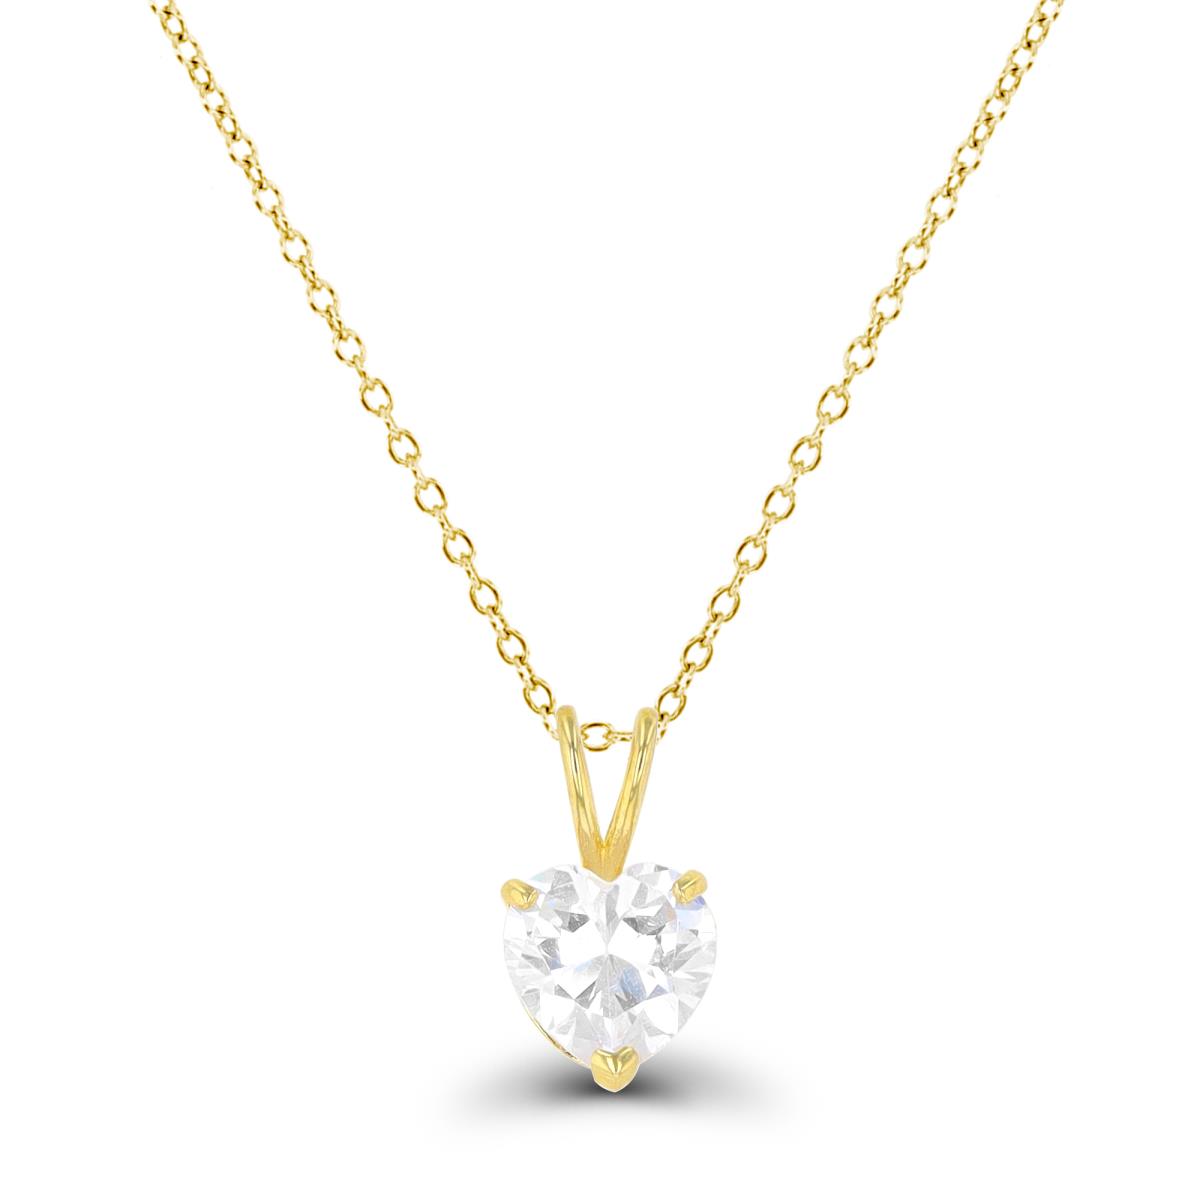 10K Yellow Gold 7mm Heart Solitaire 18" Necklace